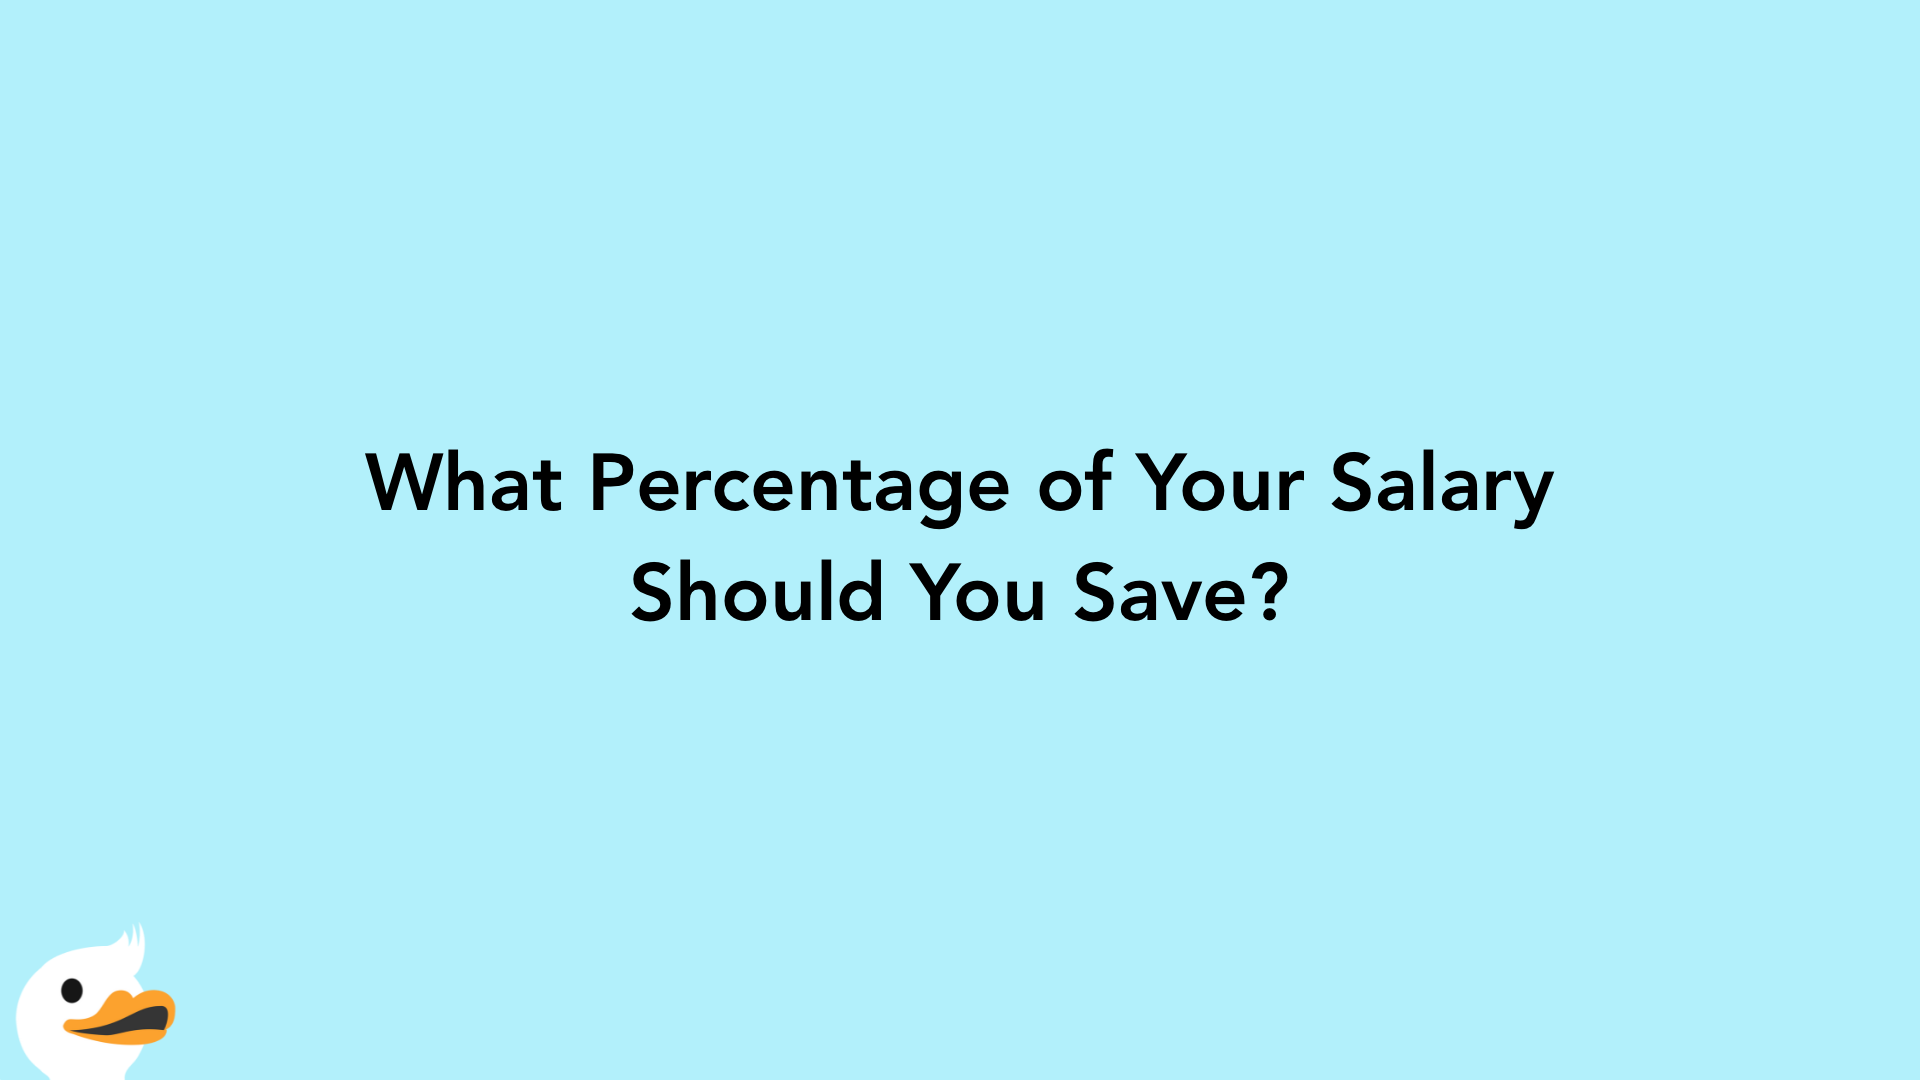 What Percentage of Your Salary Should You Save?